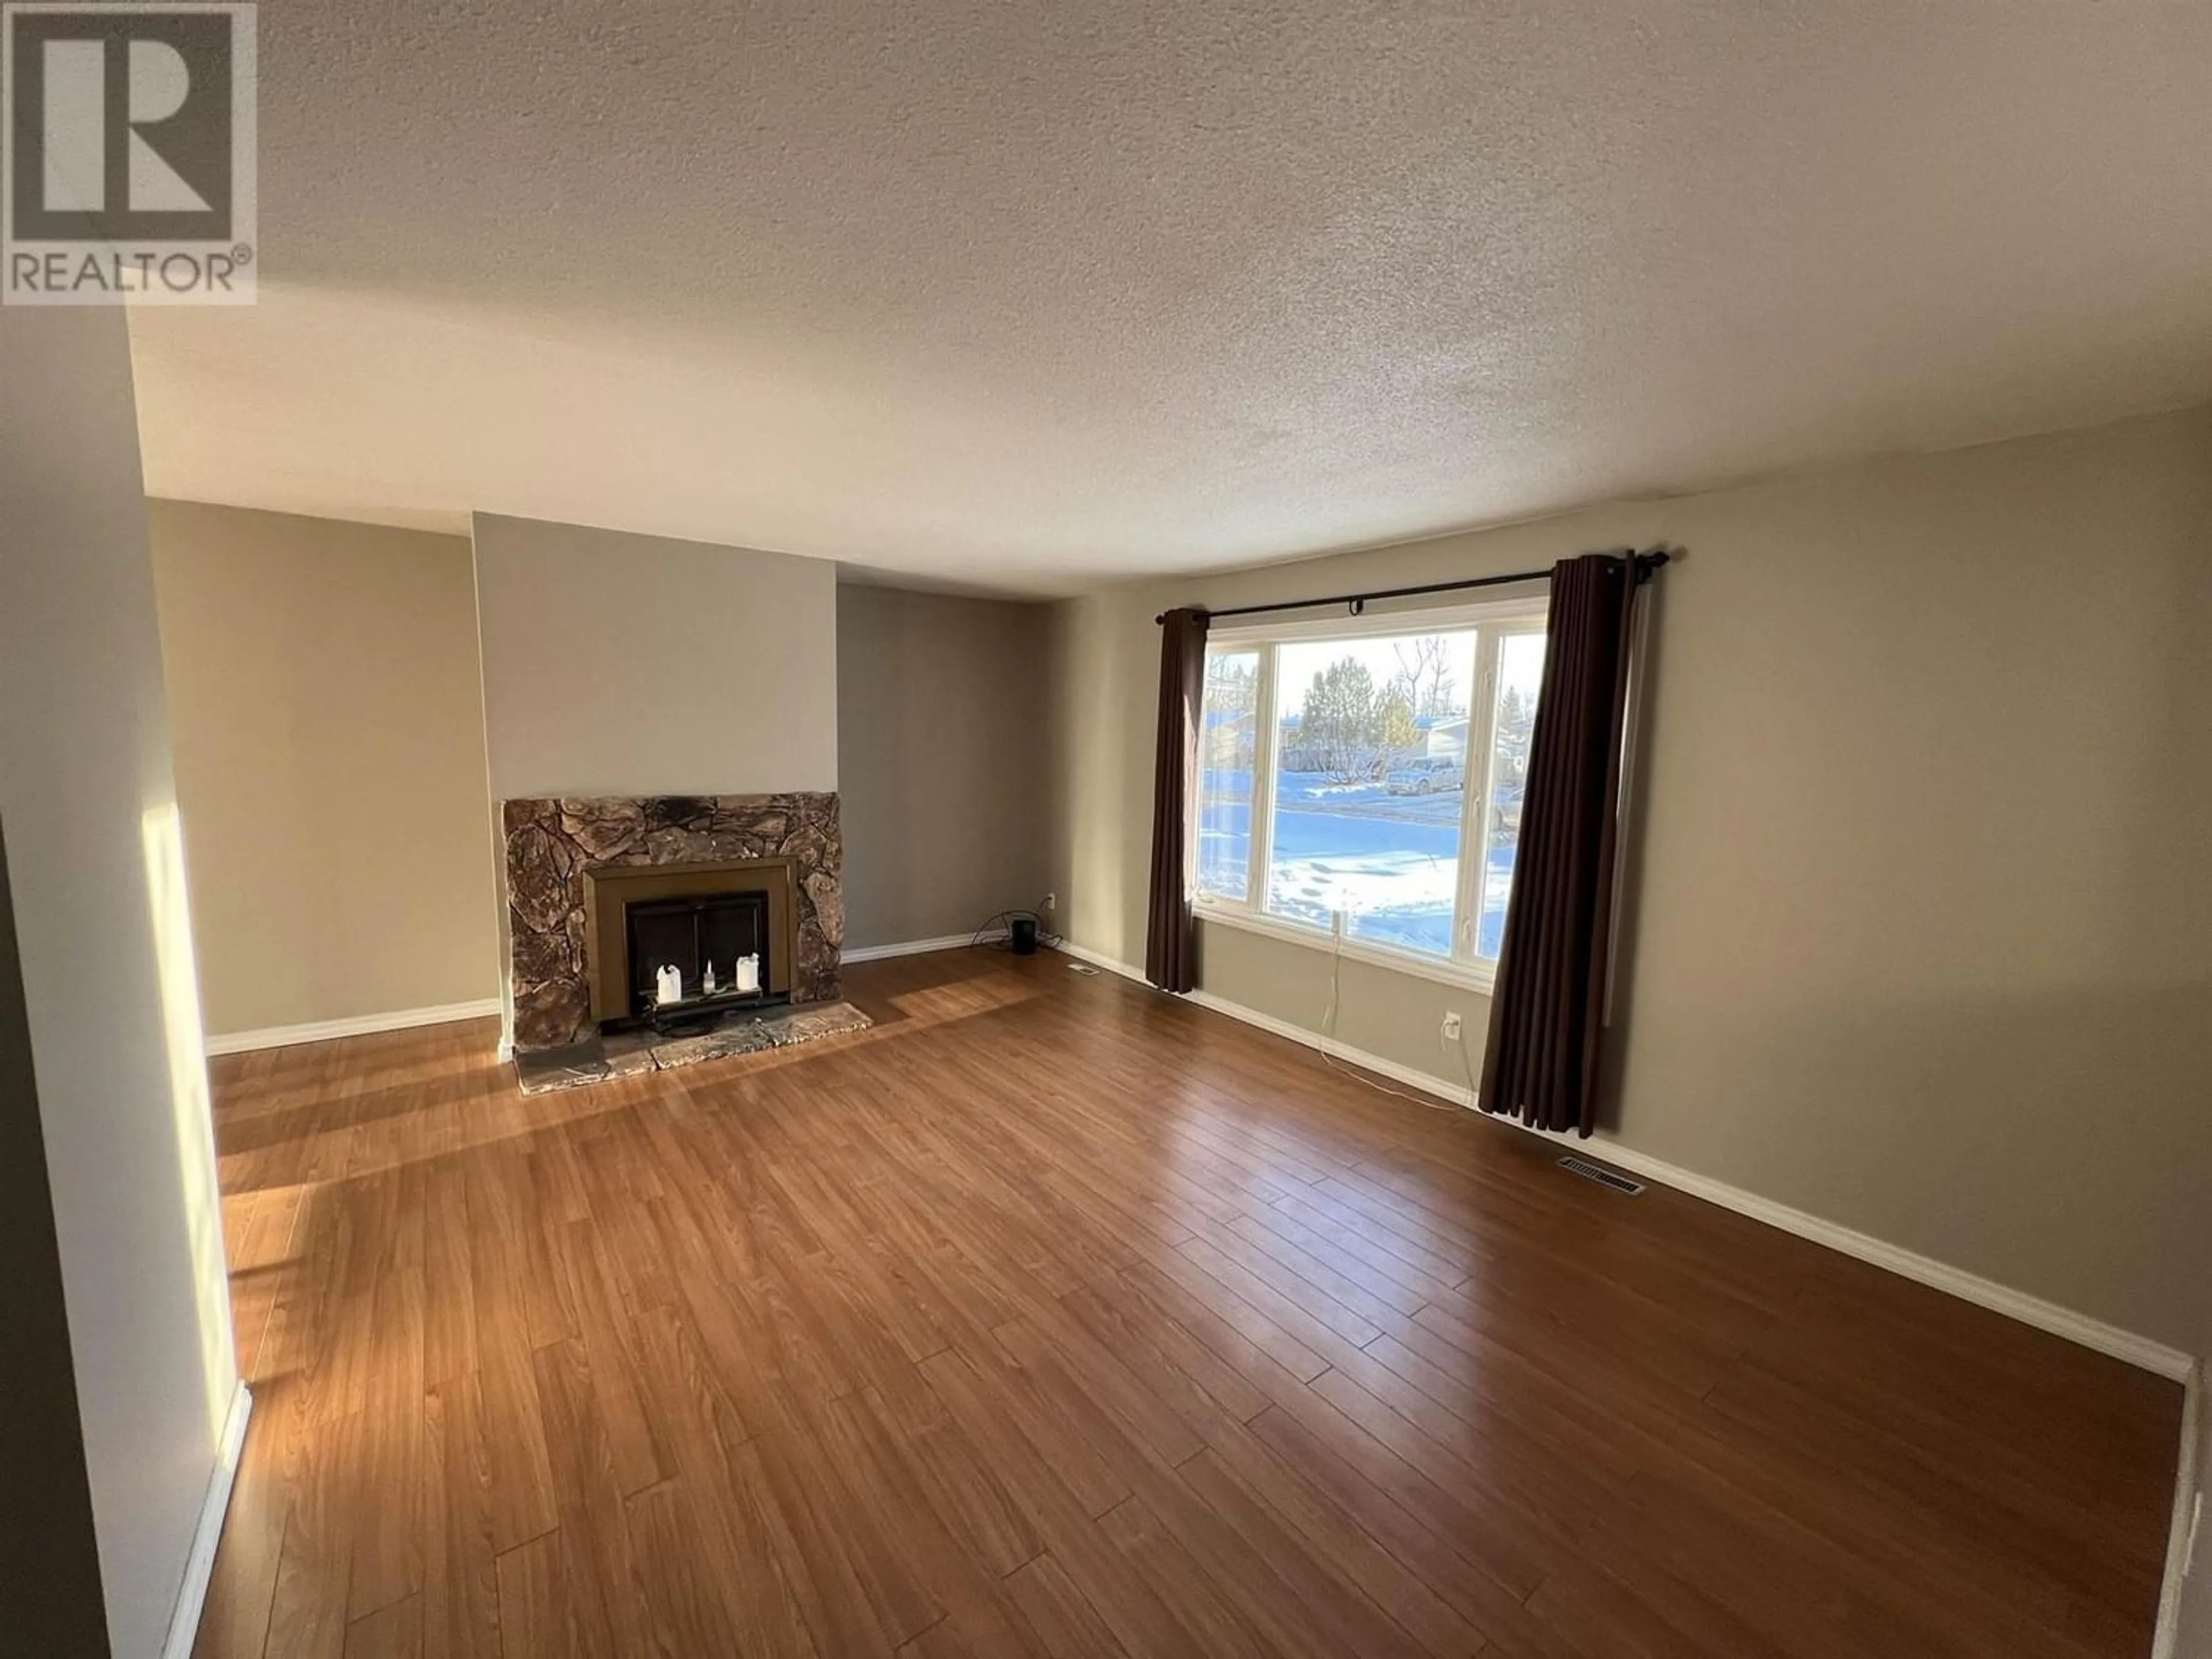 A pic of a room for 5320 TAMARACK CRESCENT, Fort Nelson British Columbia V0C1R0